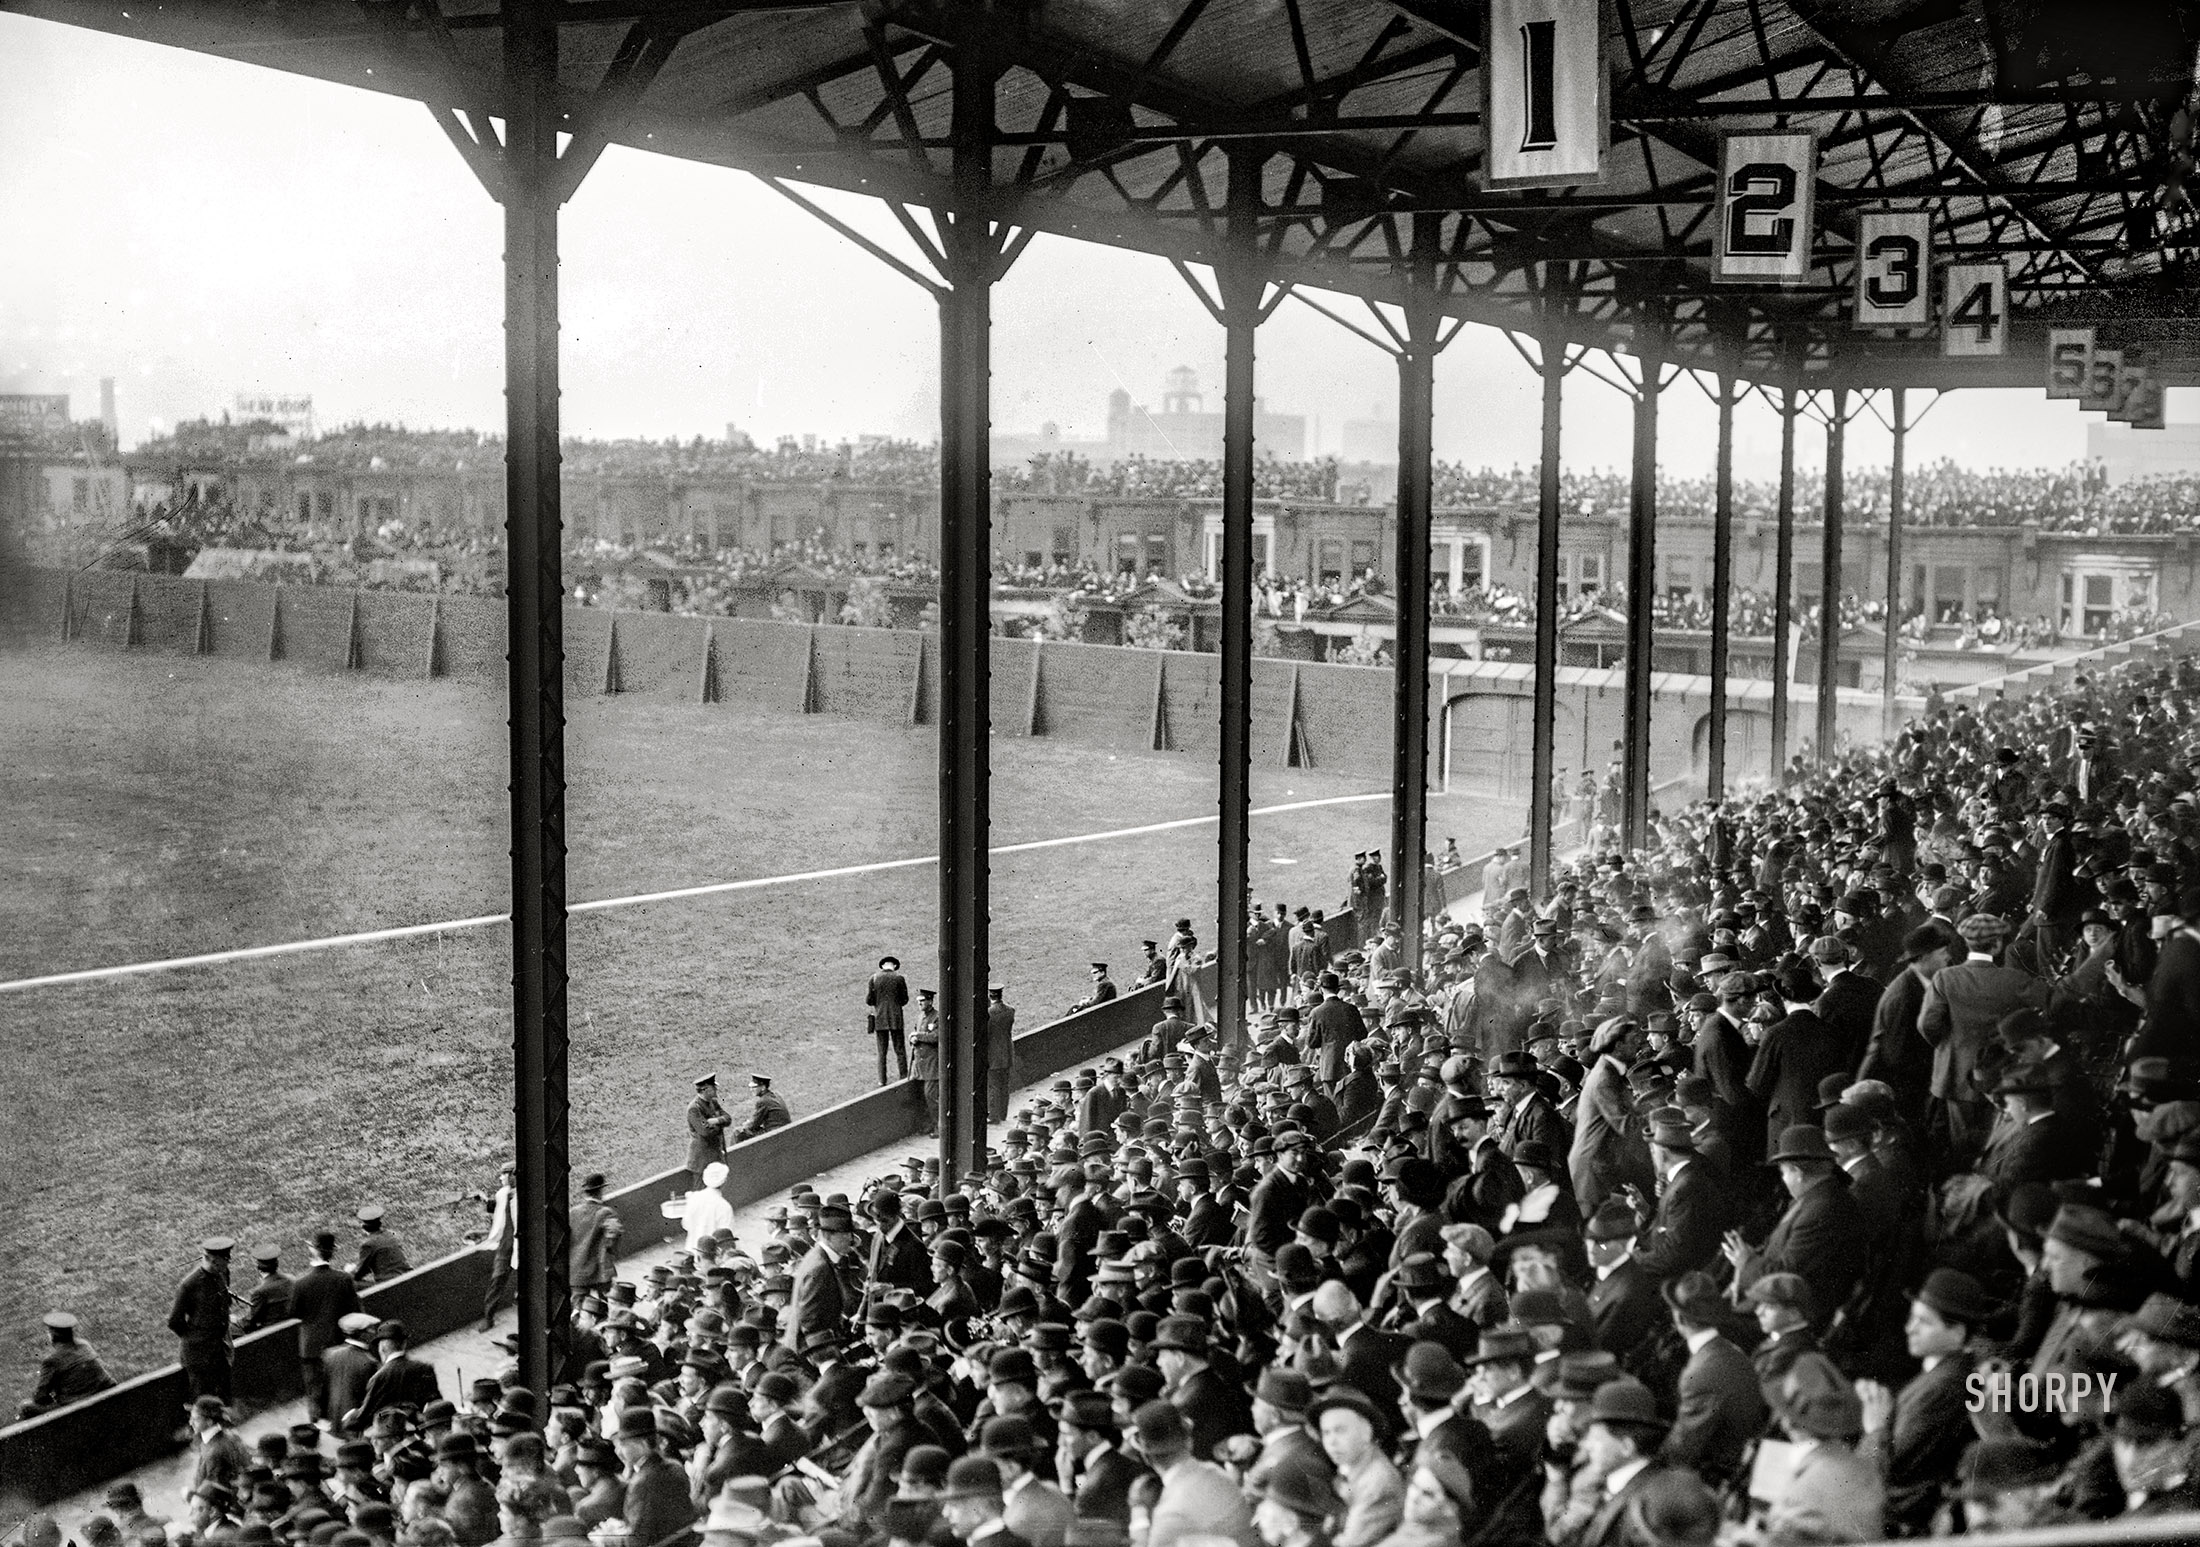 October 8, 1913. First-base grandstand at Shibe Park, Philadelphia. 1913 World Series. 8x10 glass negative, George Grantham Bain Collection. View full size.